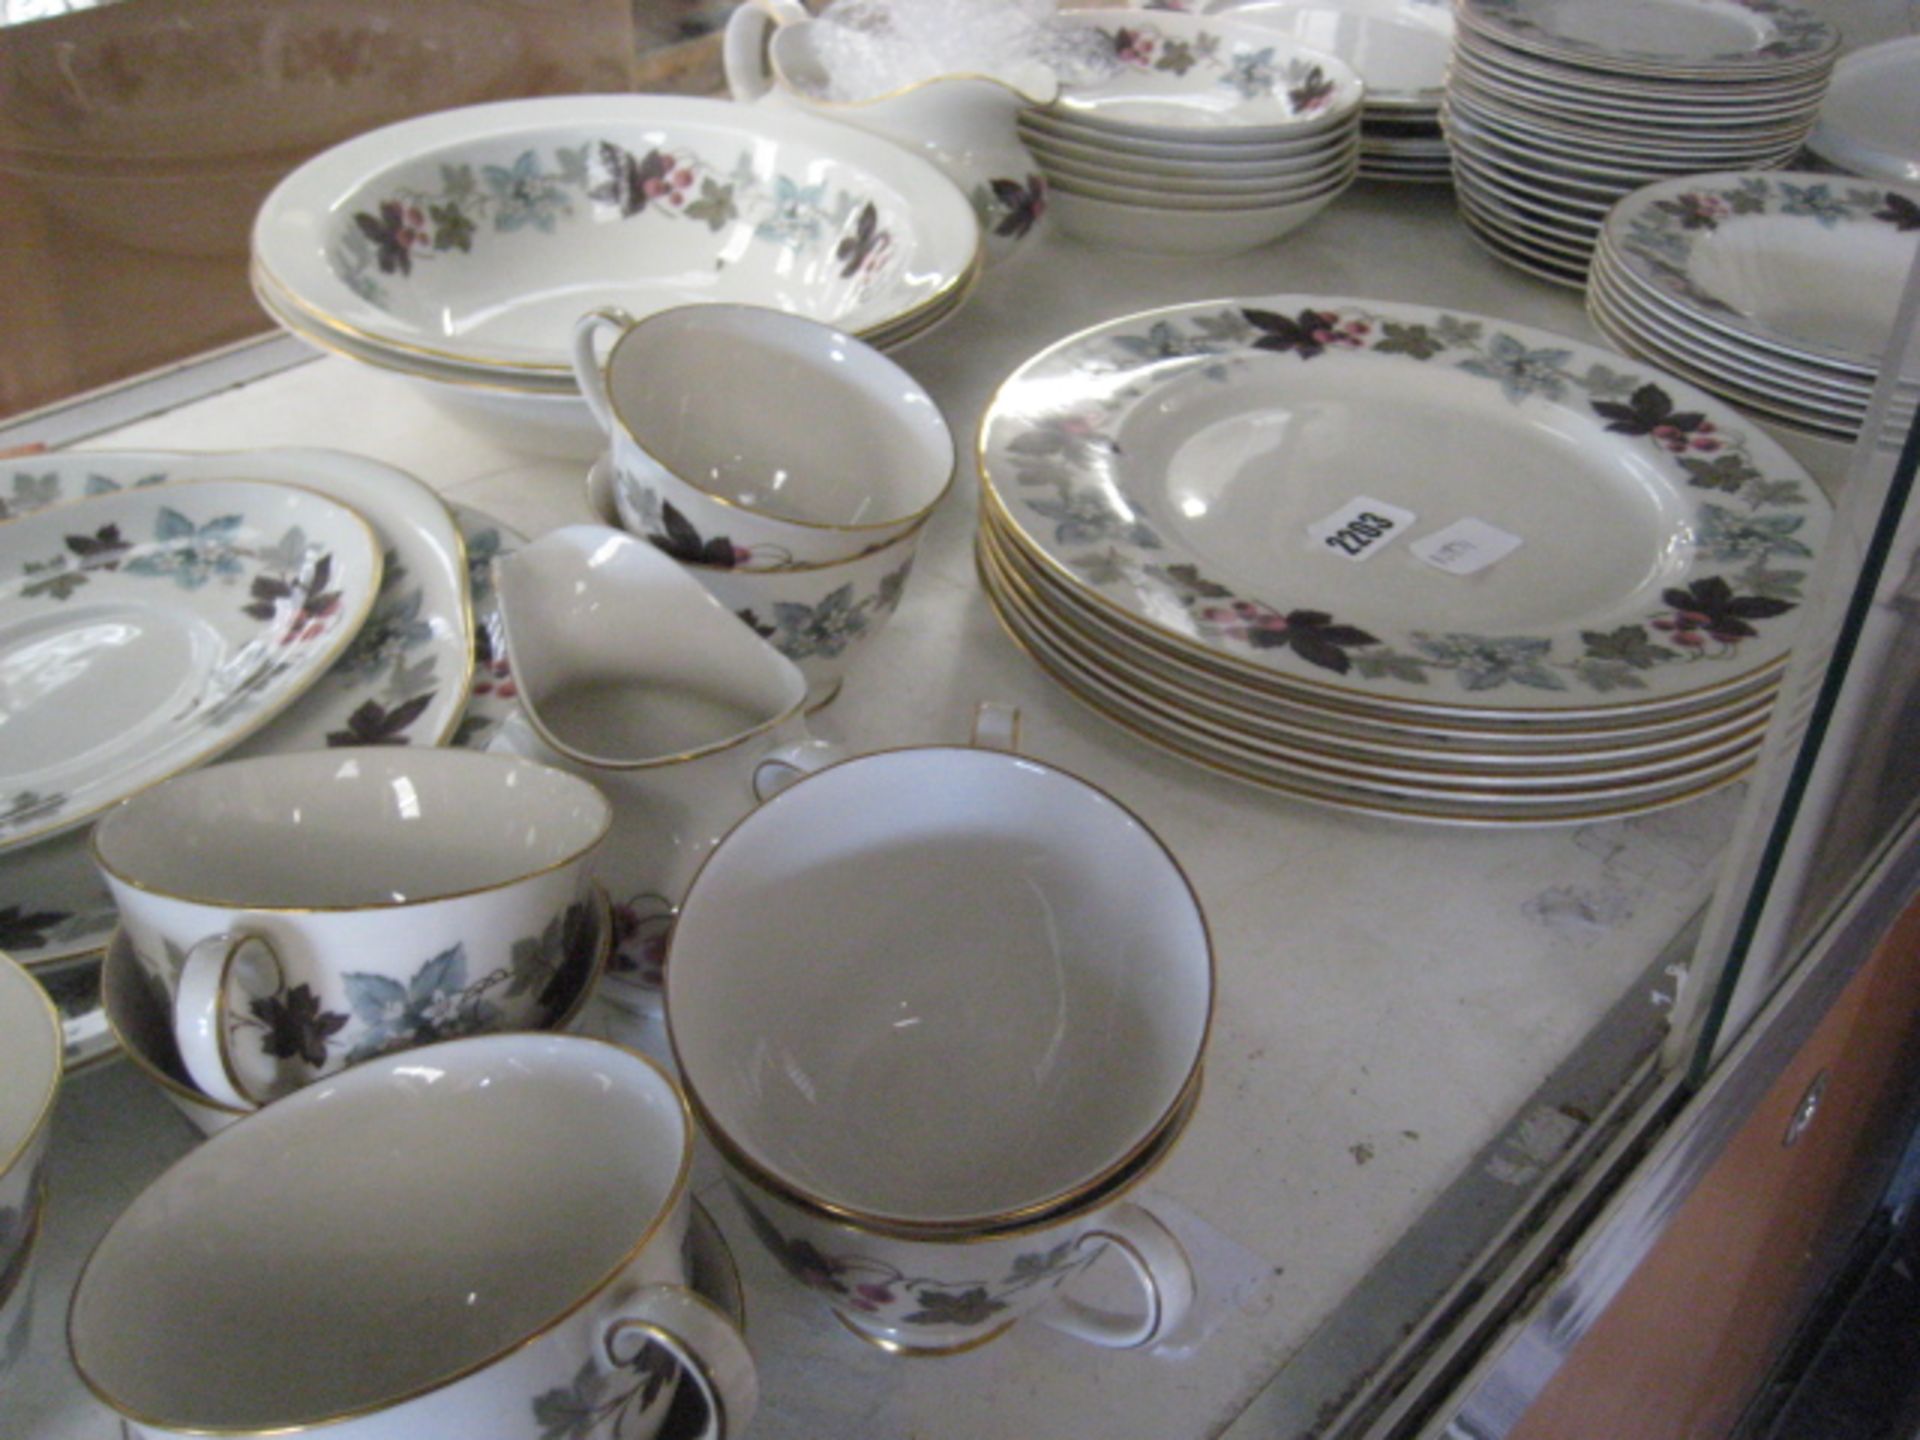 Quantity of Royal Doulton Camelot dinner service